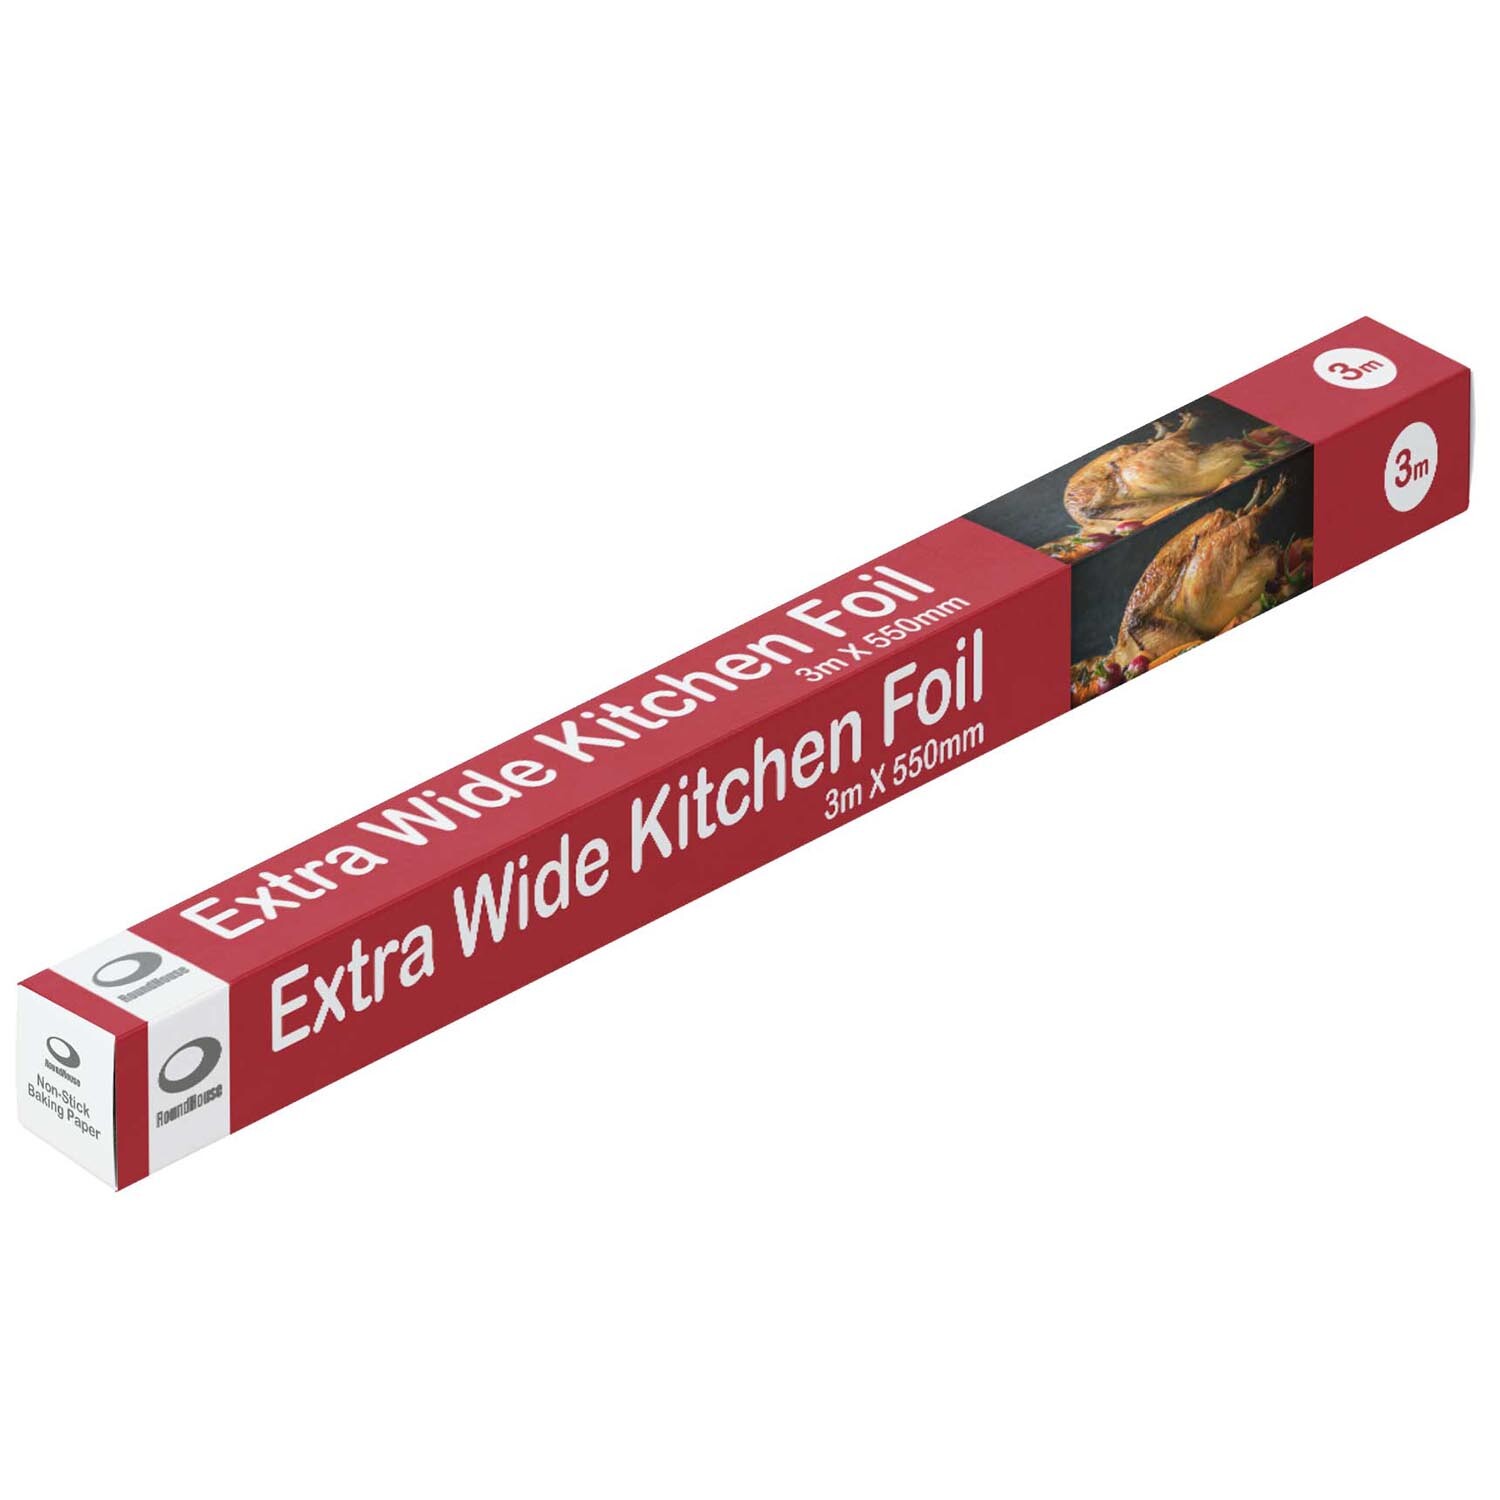 Extra Wide Kitchen Foil - Silver Image